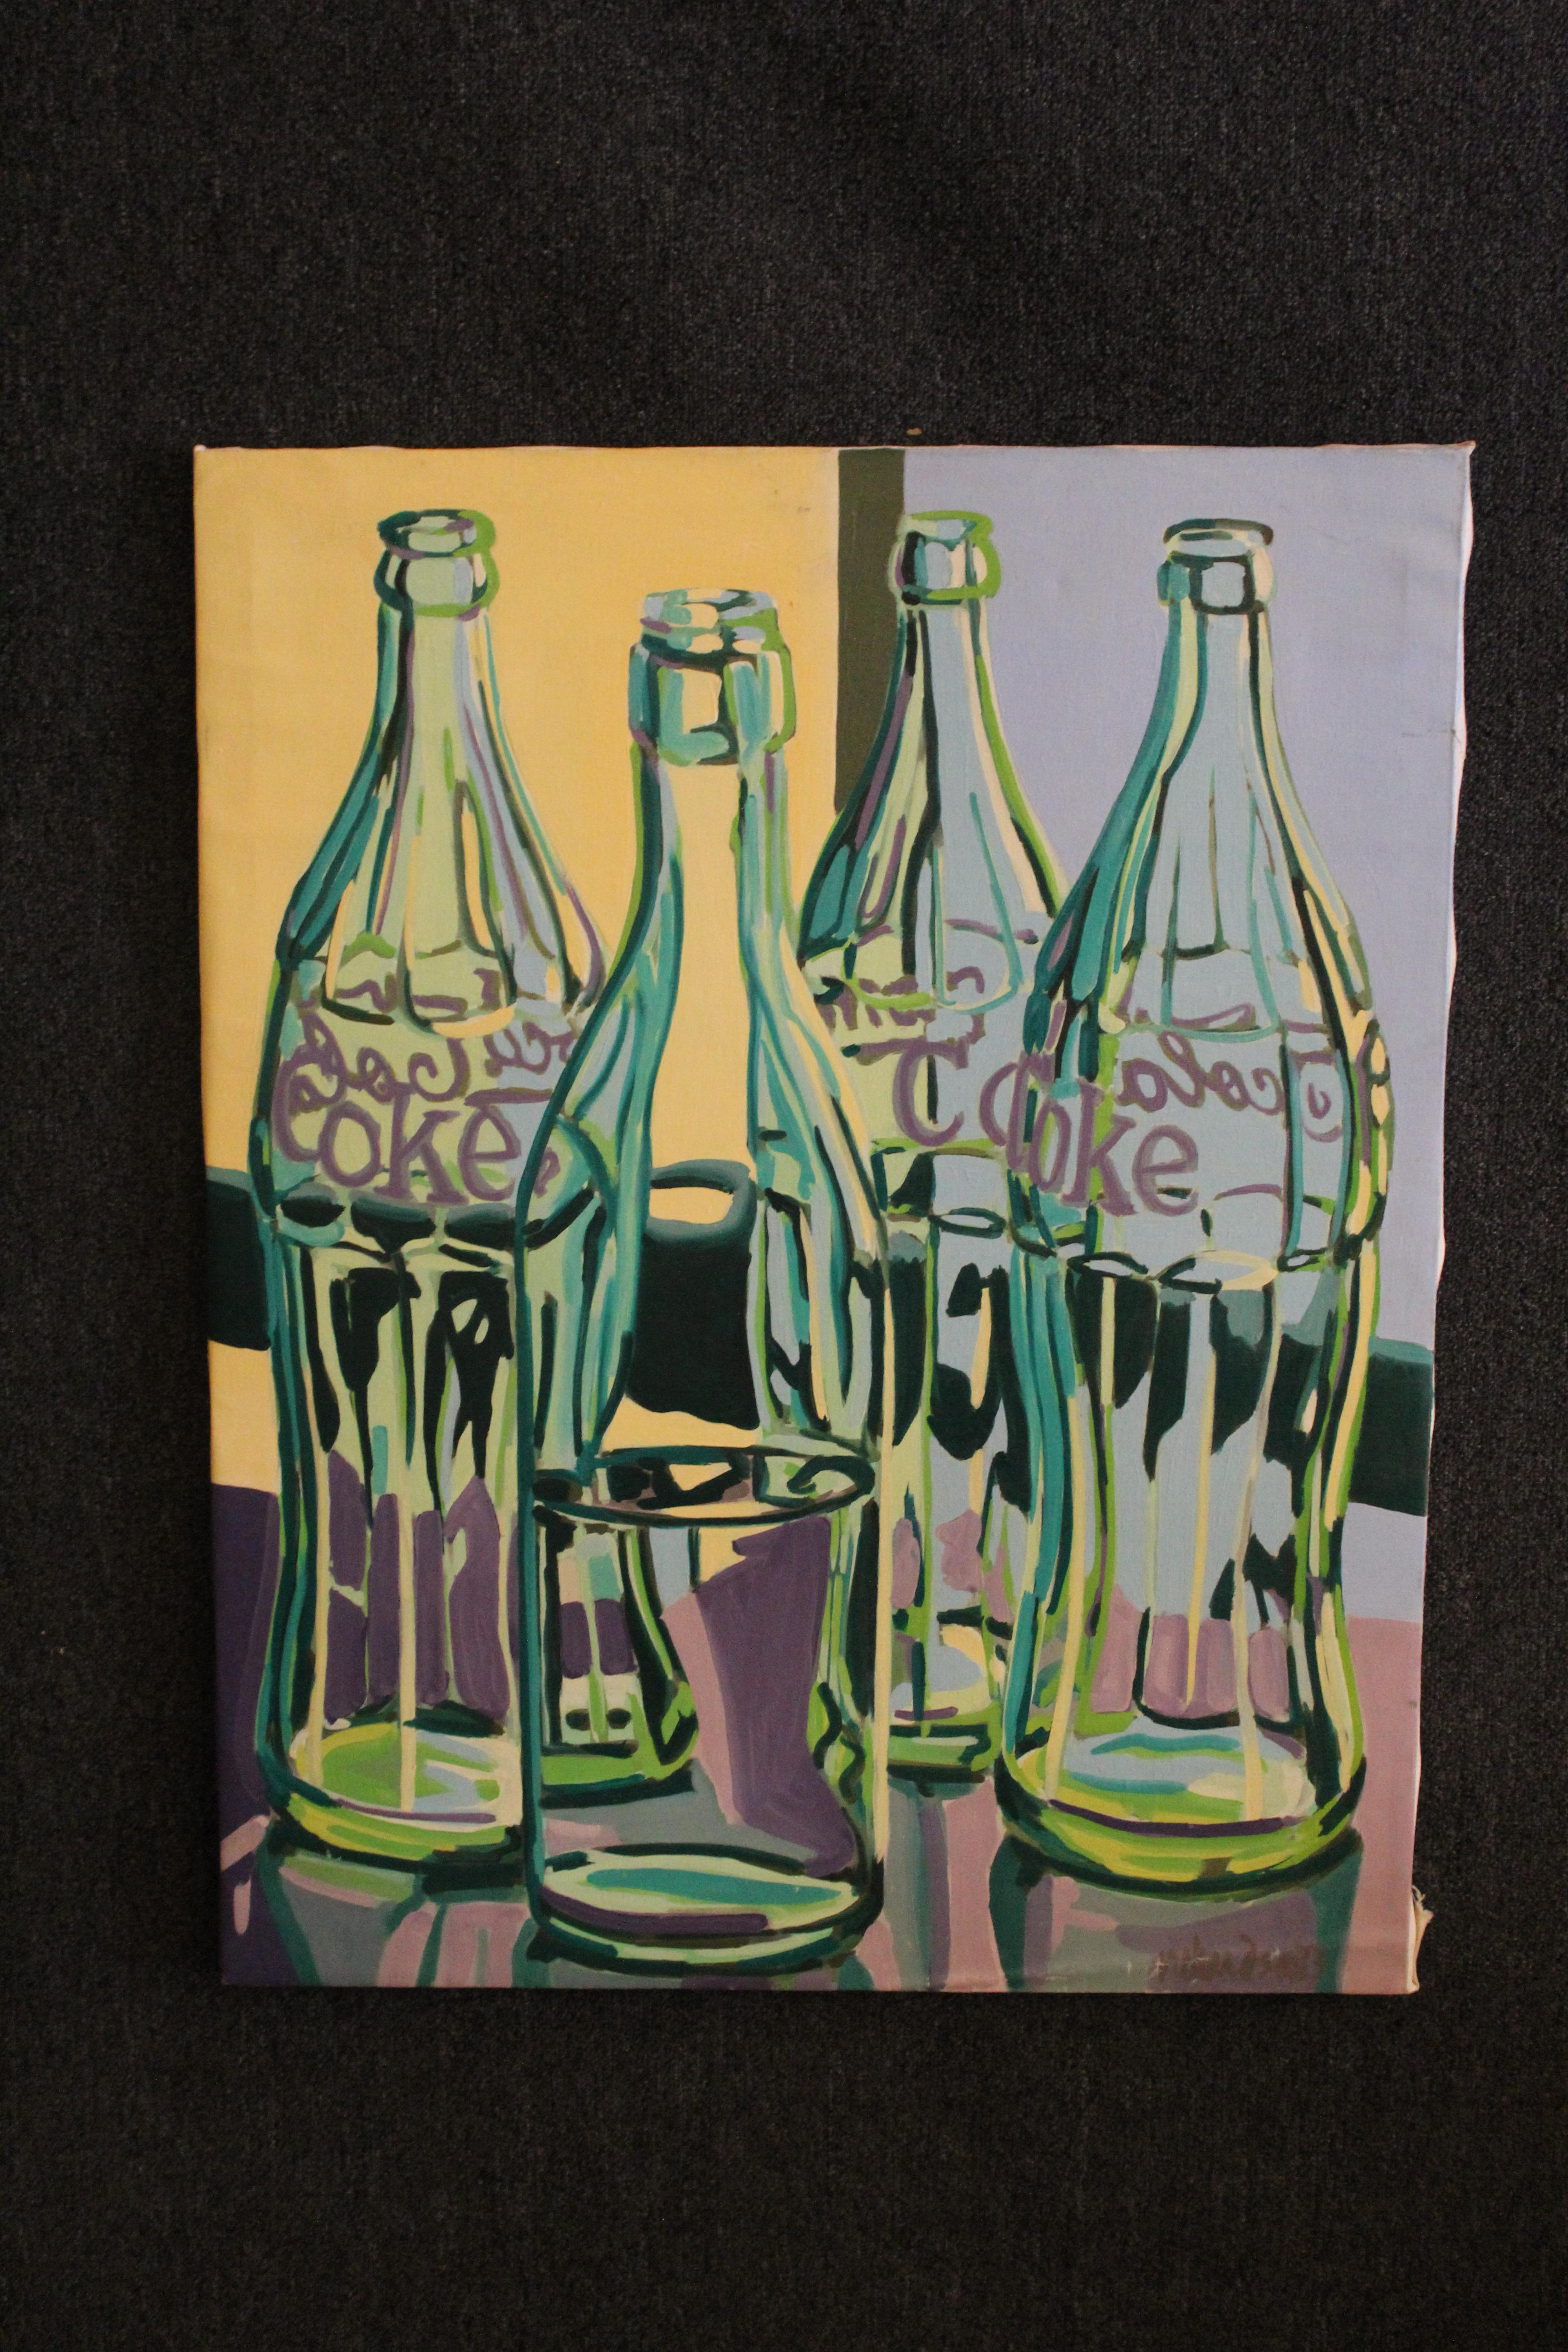 Give your wall some tasty decor with this delicious vintage painting on canvas. Proudly featuring a quartet of iconic glass soda-pop bottles from the world famous Coca-Cola brand, this piece is sure to inspire a sense of fun and nostalgia within all